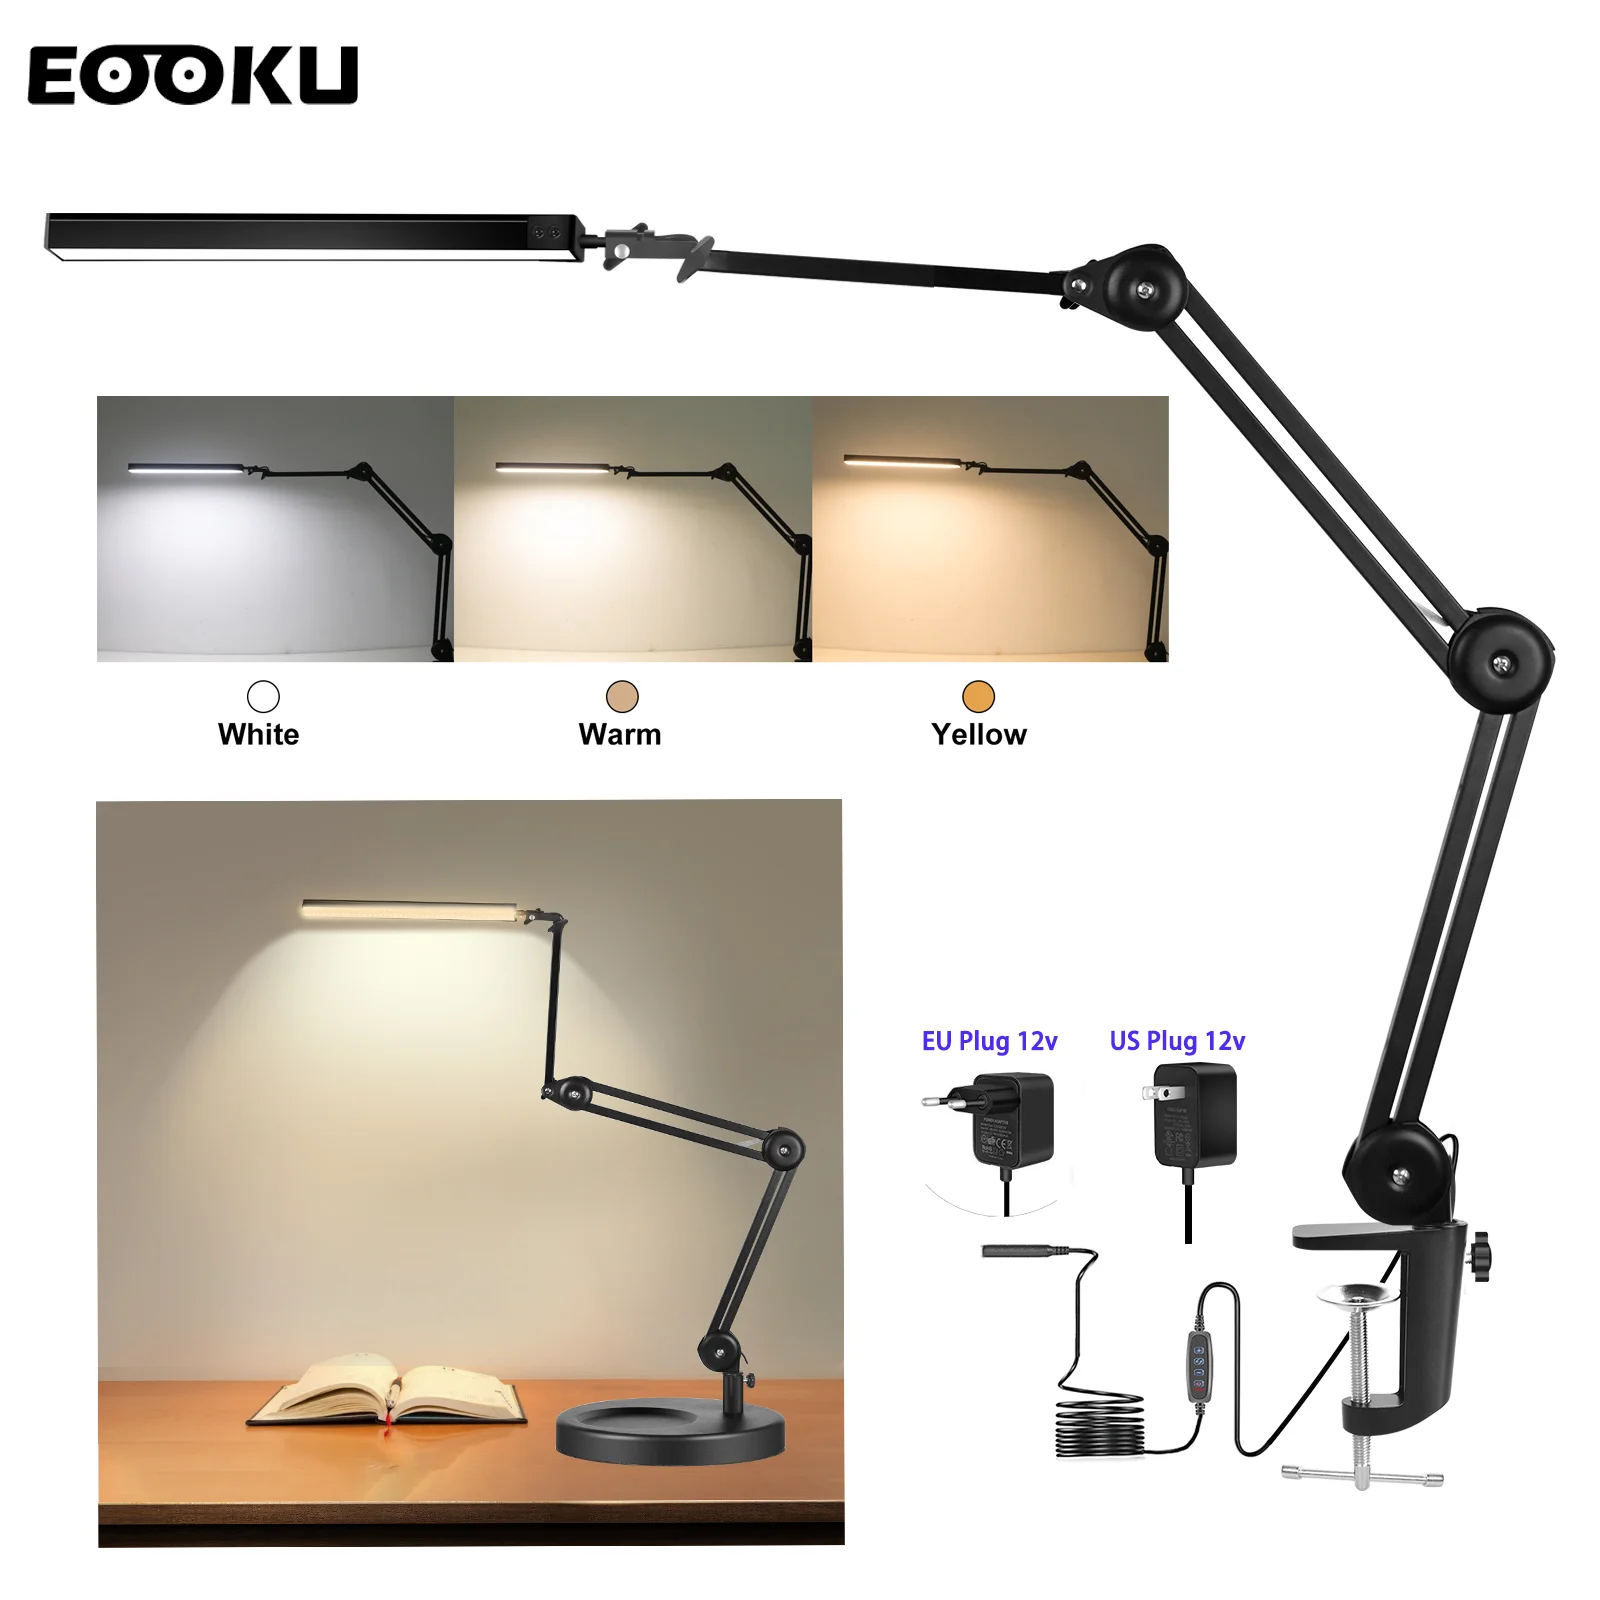 

LED Desk Lamp Light Heavy Duty Base Foldable Table Lamps for Home Office Dimmable Eye-Caring Reading Desk Lights for Study Read